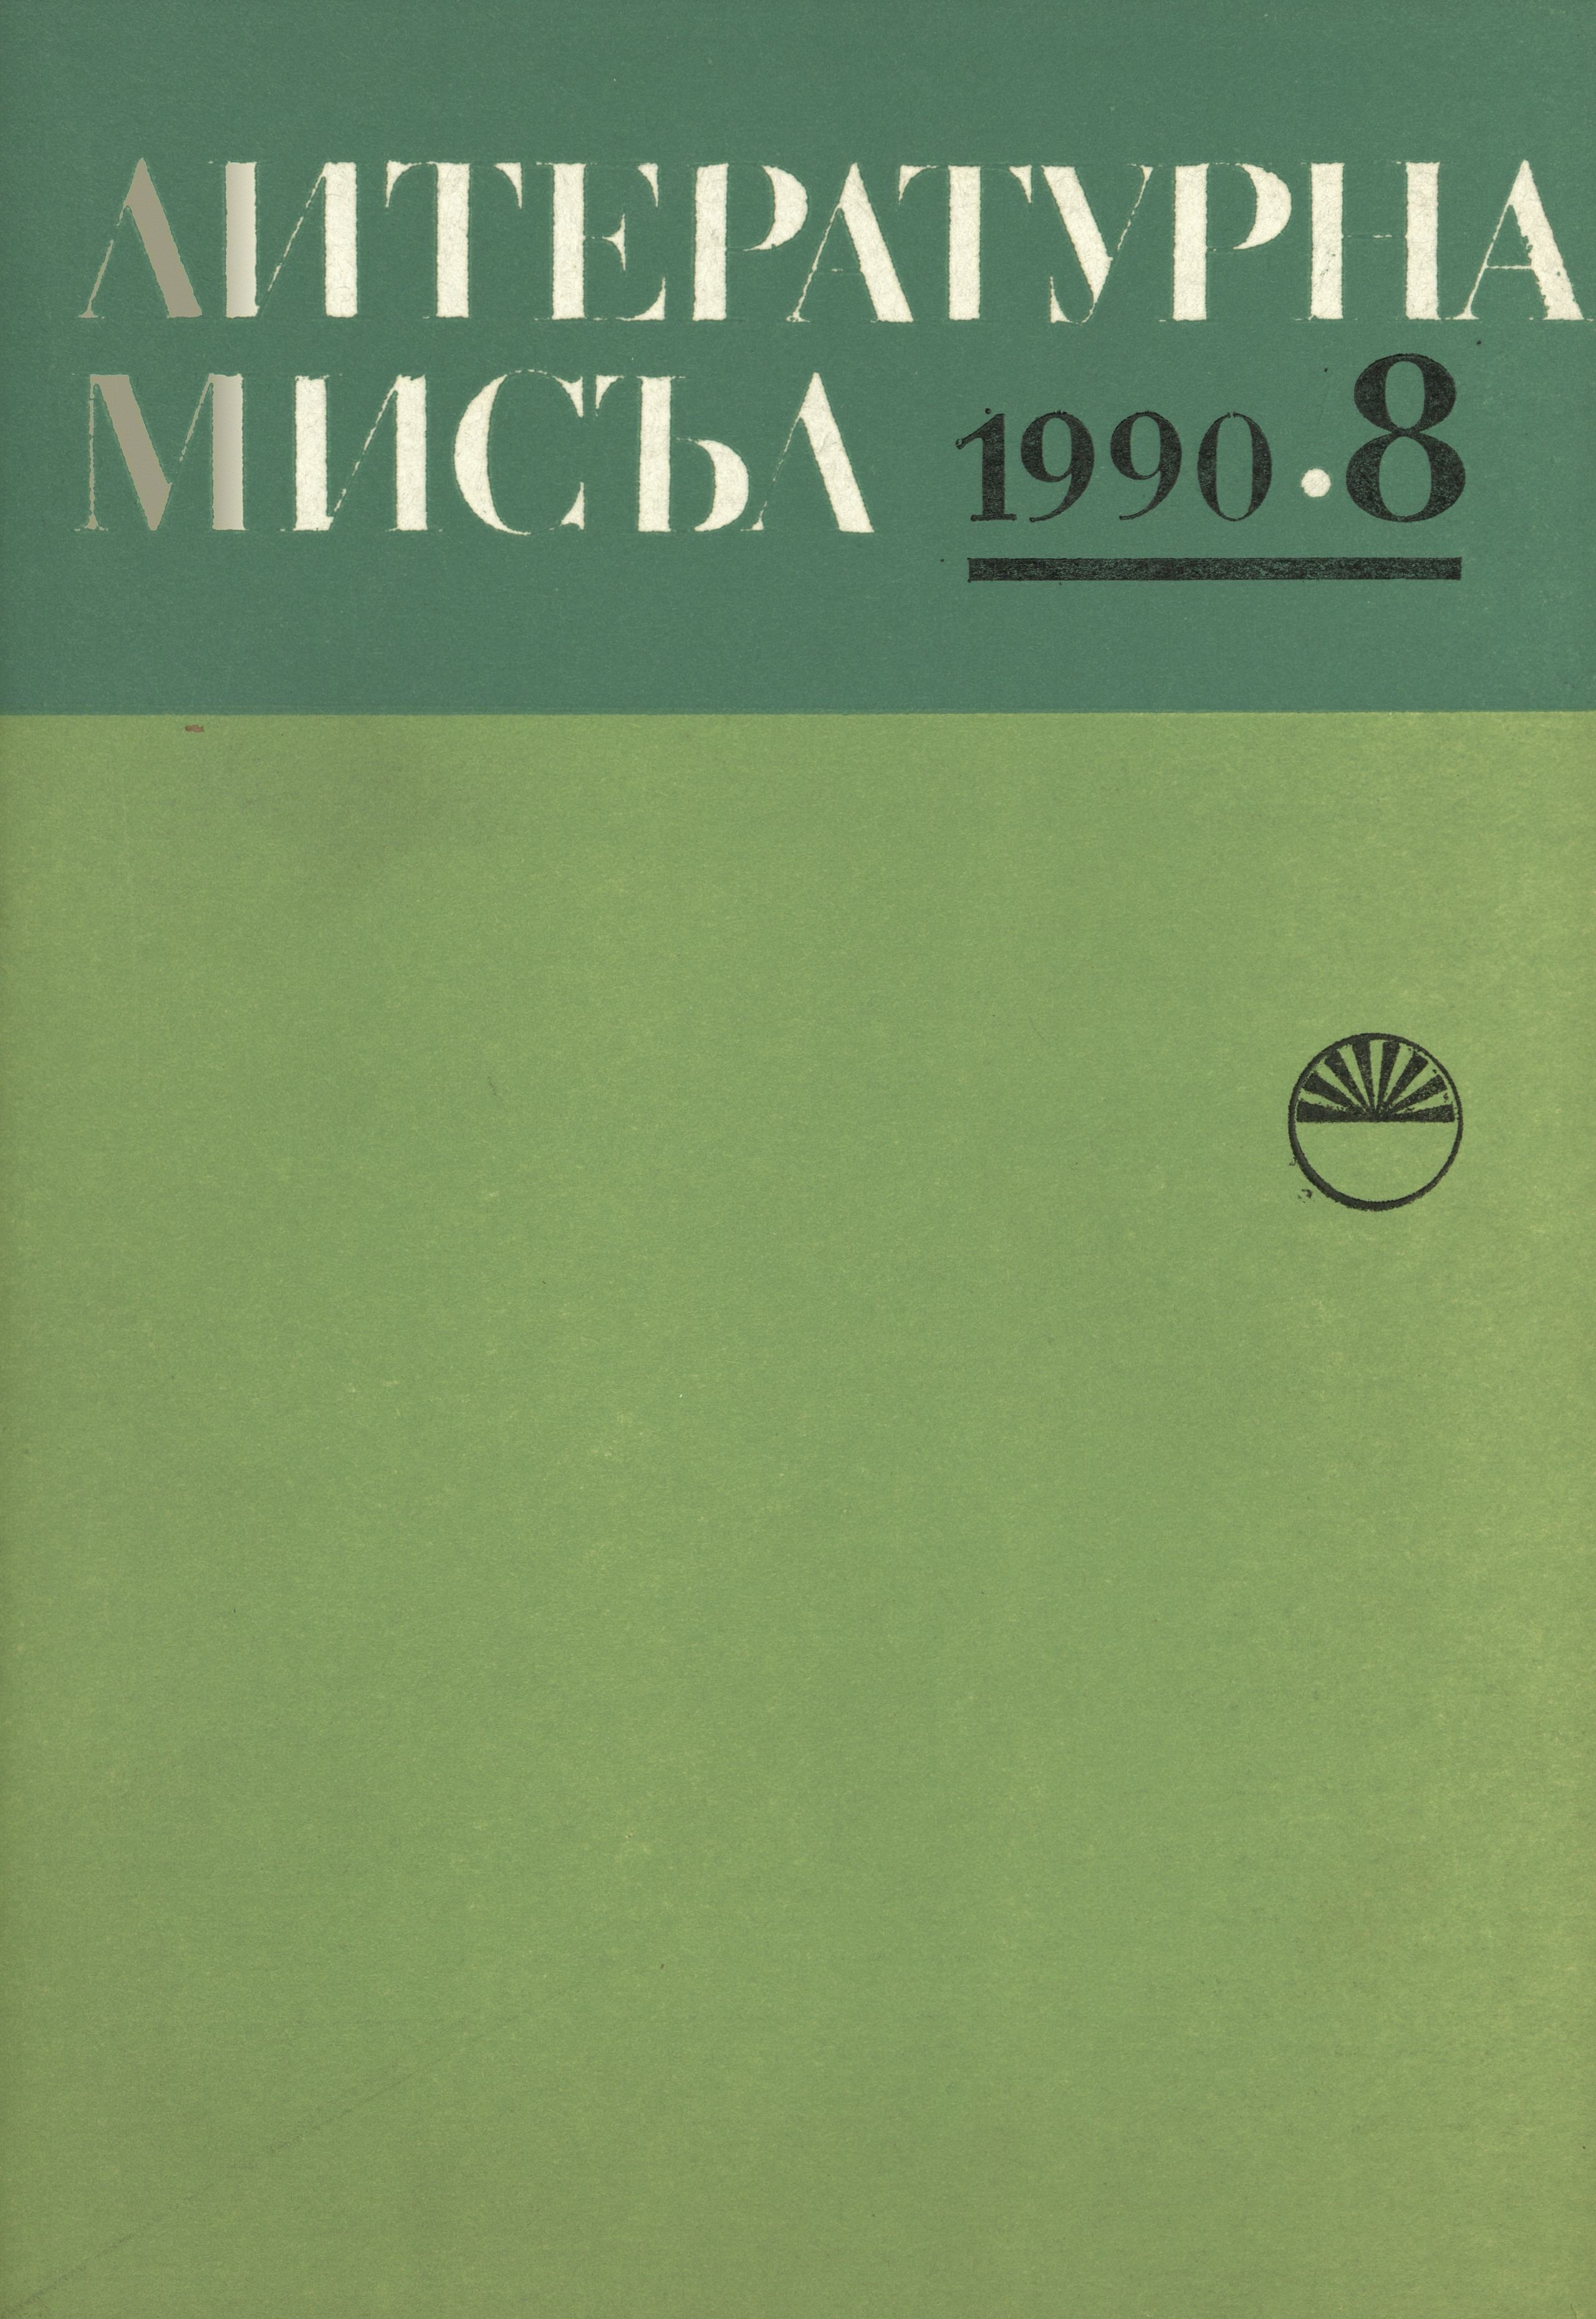 Issue 8, 1990